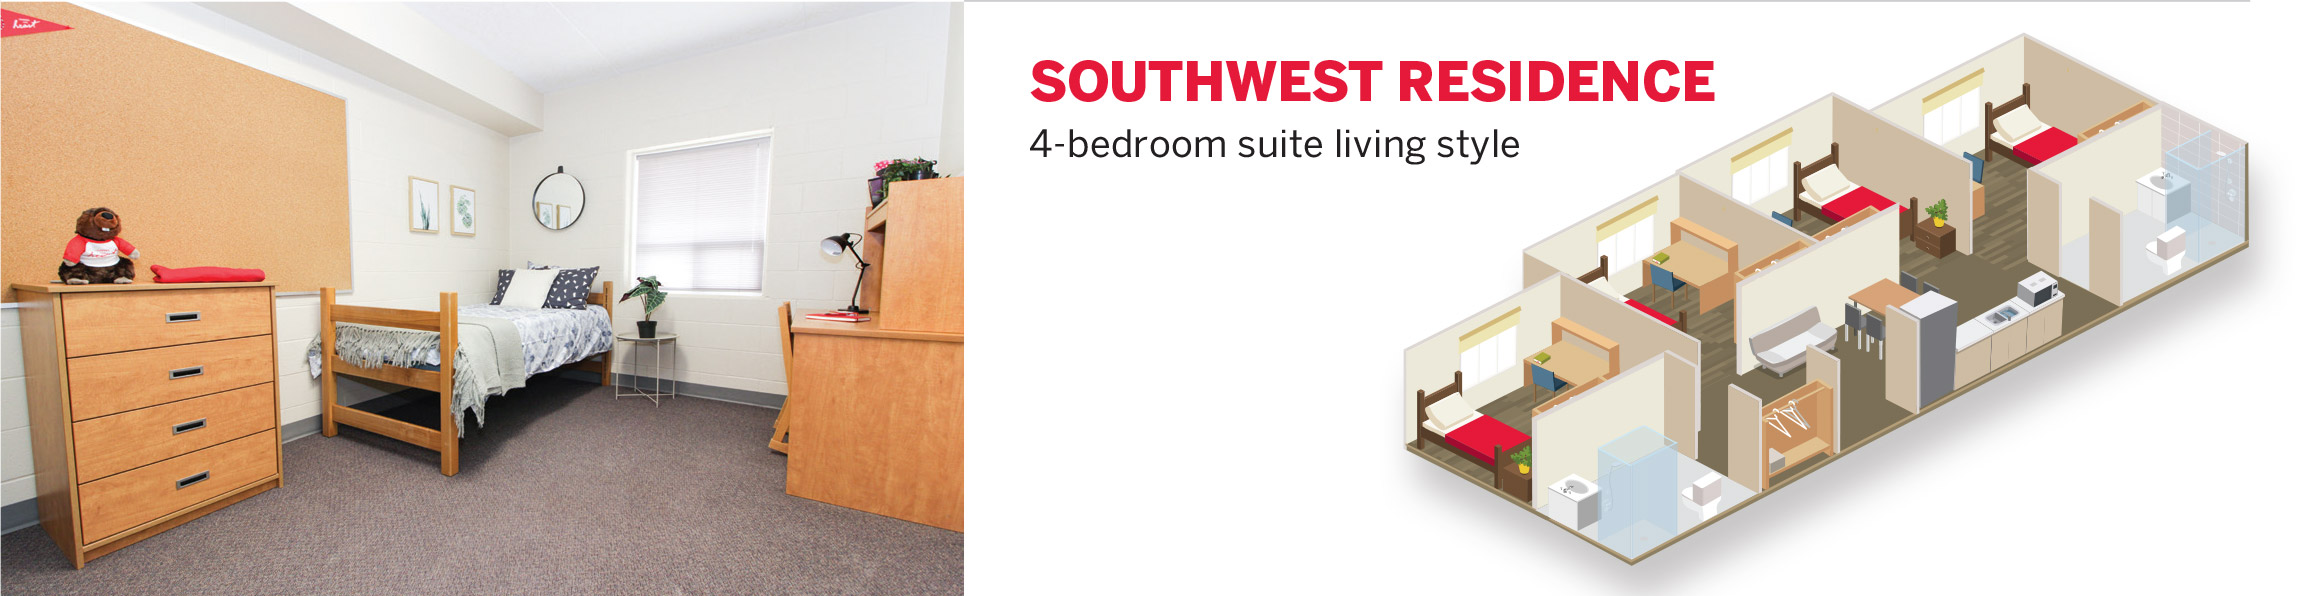 photo of room in Southwest Residence and an overview rendering showing the layout with four single bedrooms sharing a semi-private kitchenette, living room and two washrooms